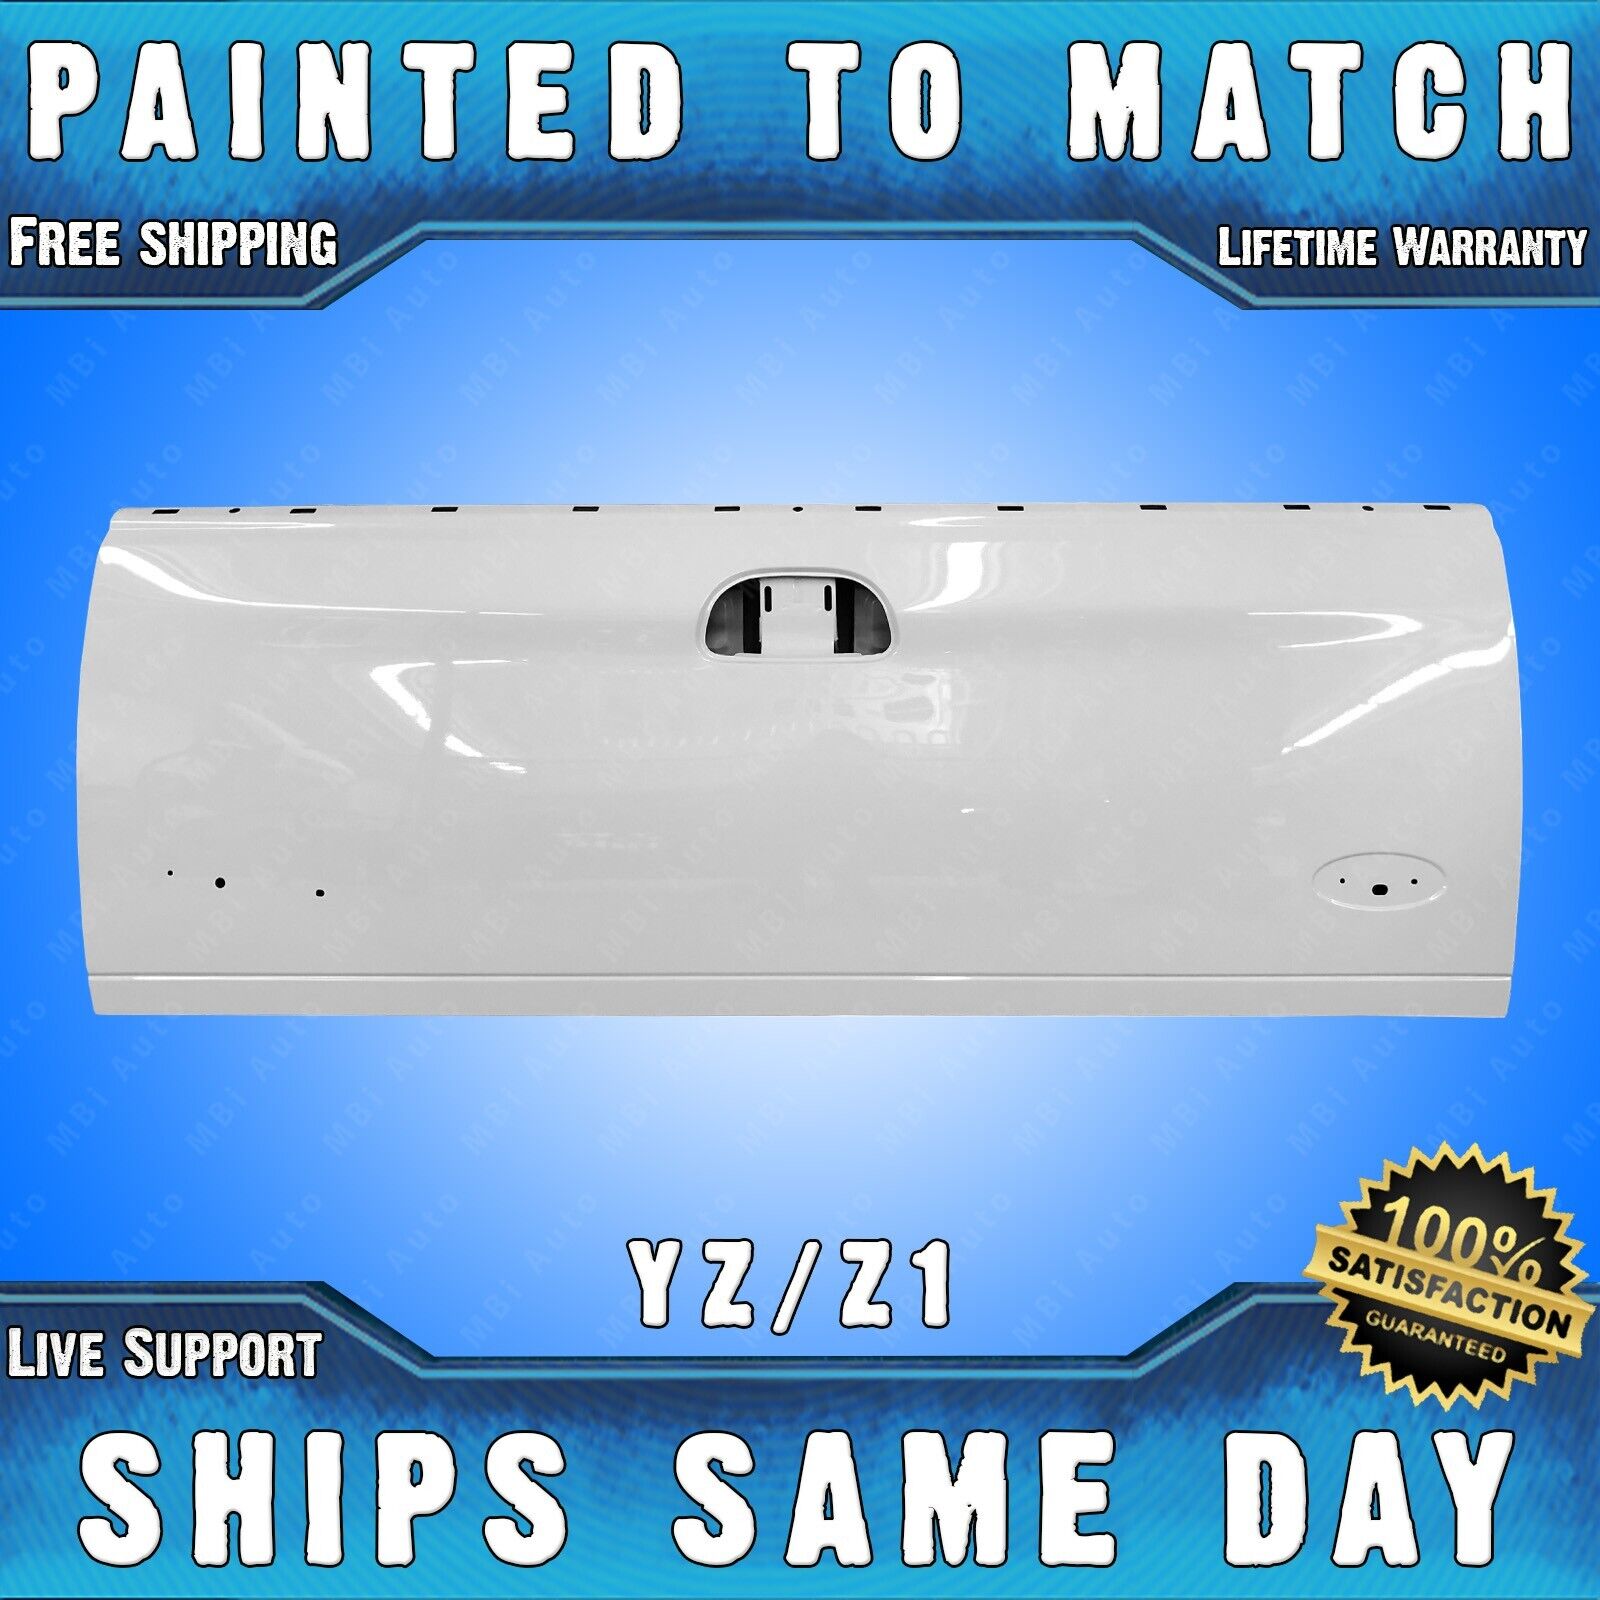 NEW *Painted YZ/Z1 Oxford White* Tailgate Shell for Ford F-250 F-350 Super Duty